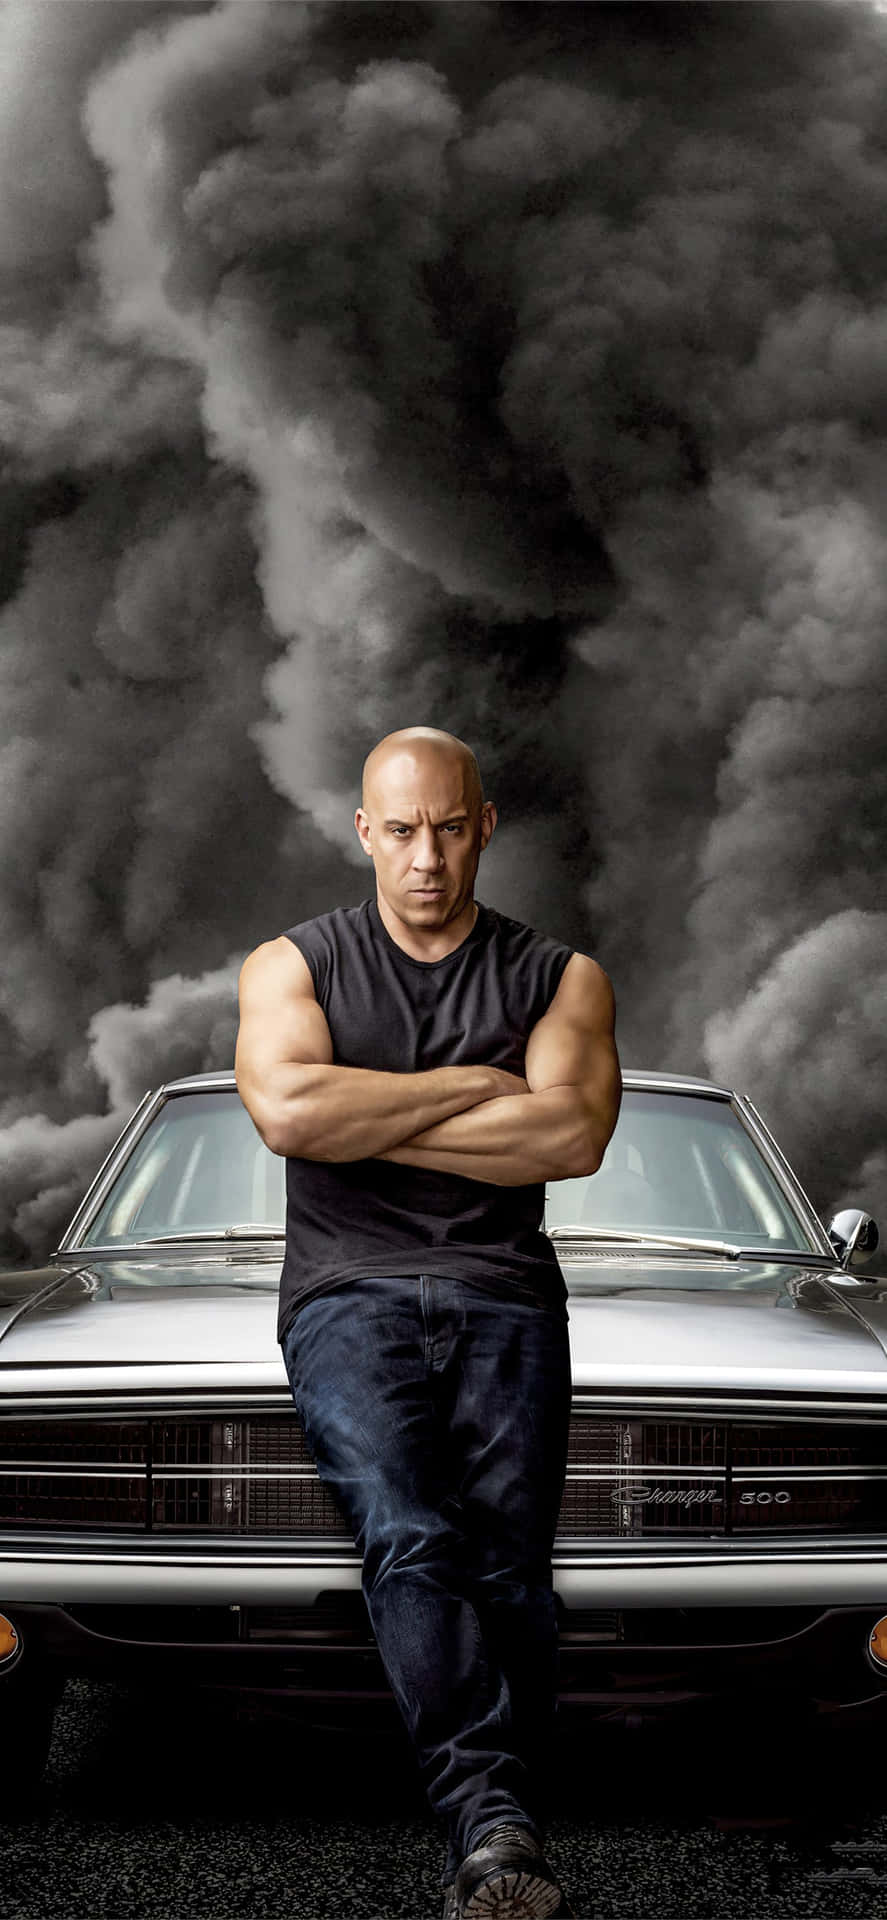 Drive with style with the Fast and Furious Iphone Wallpaper